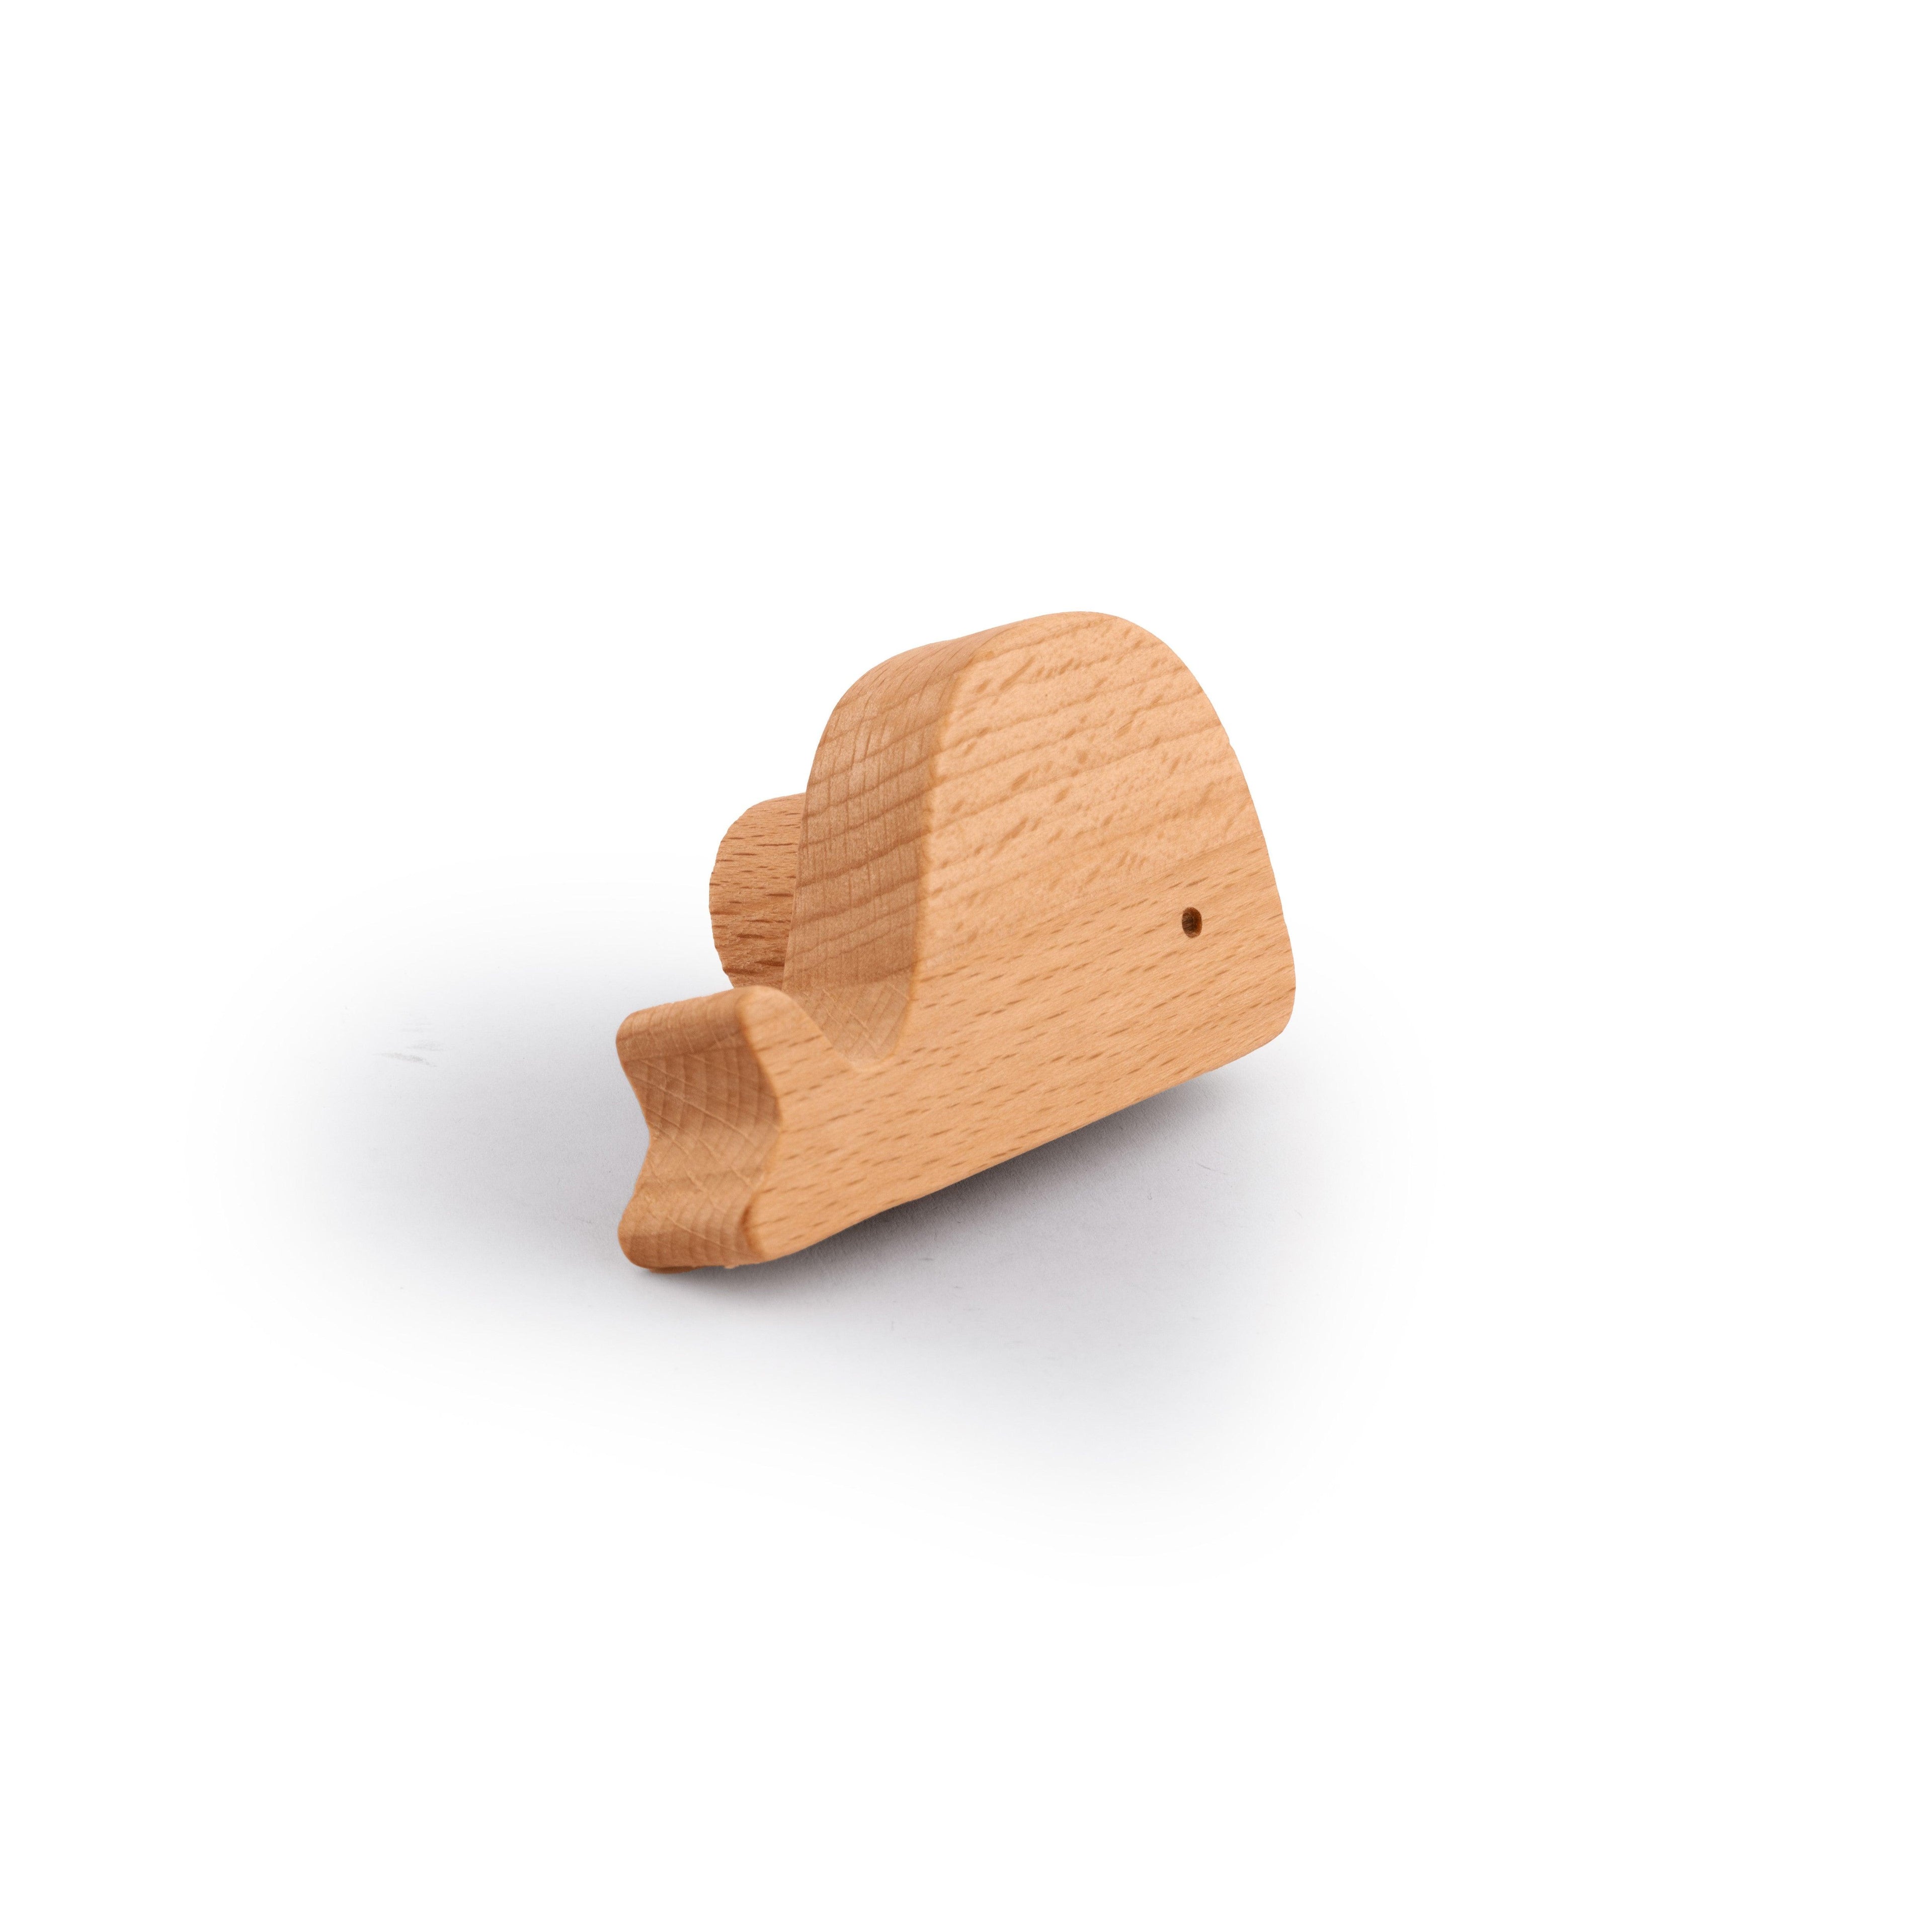 Mantara W-0024-Whale Wood Knob  Charming Wood Hook for Kids and More – M A  N T A R A